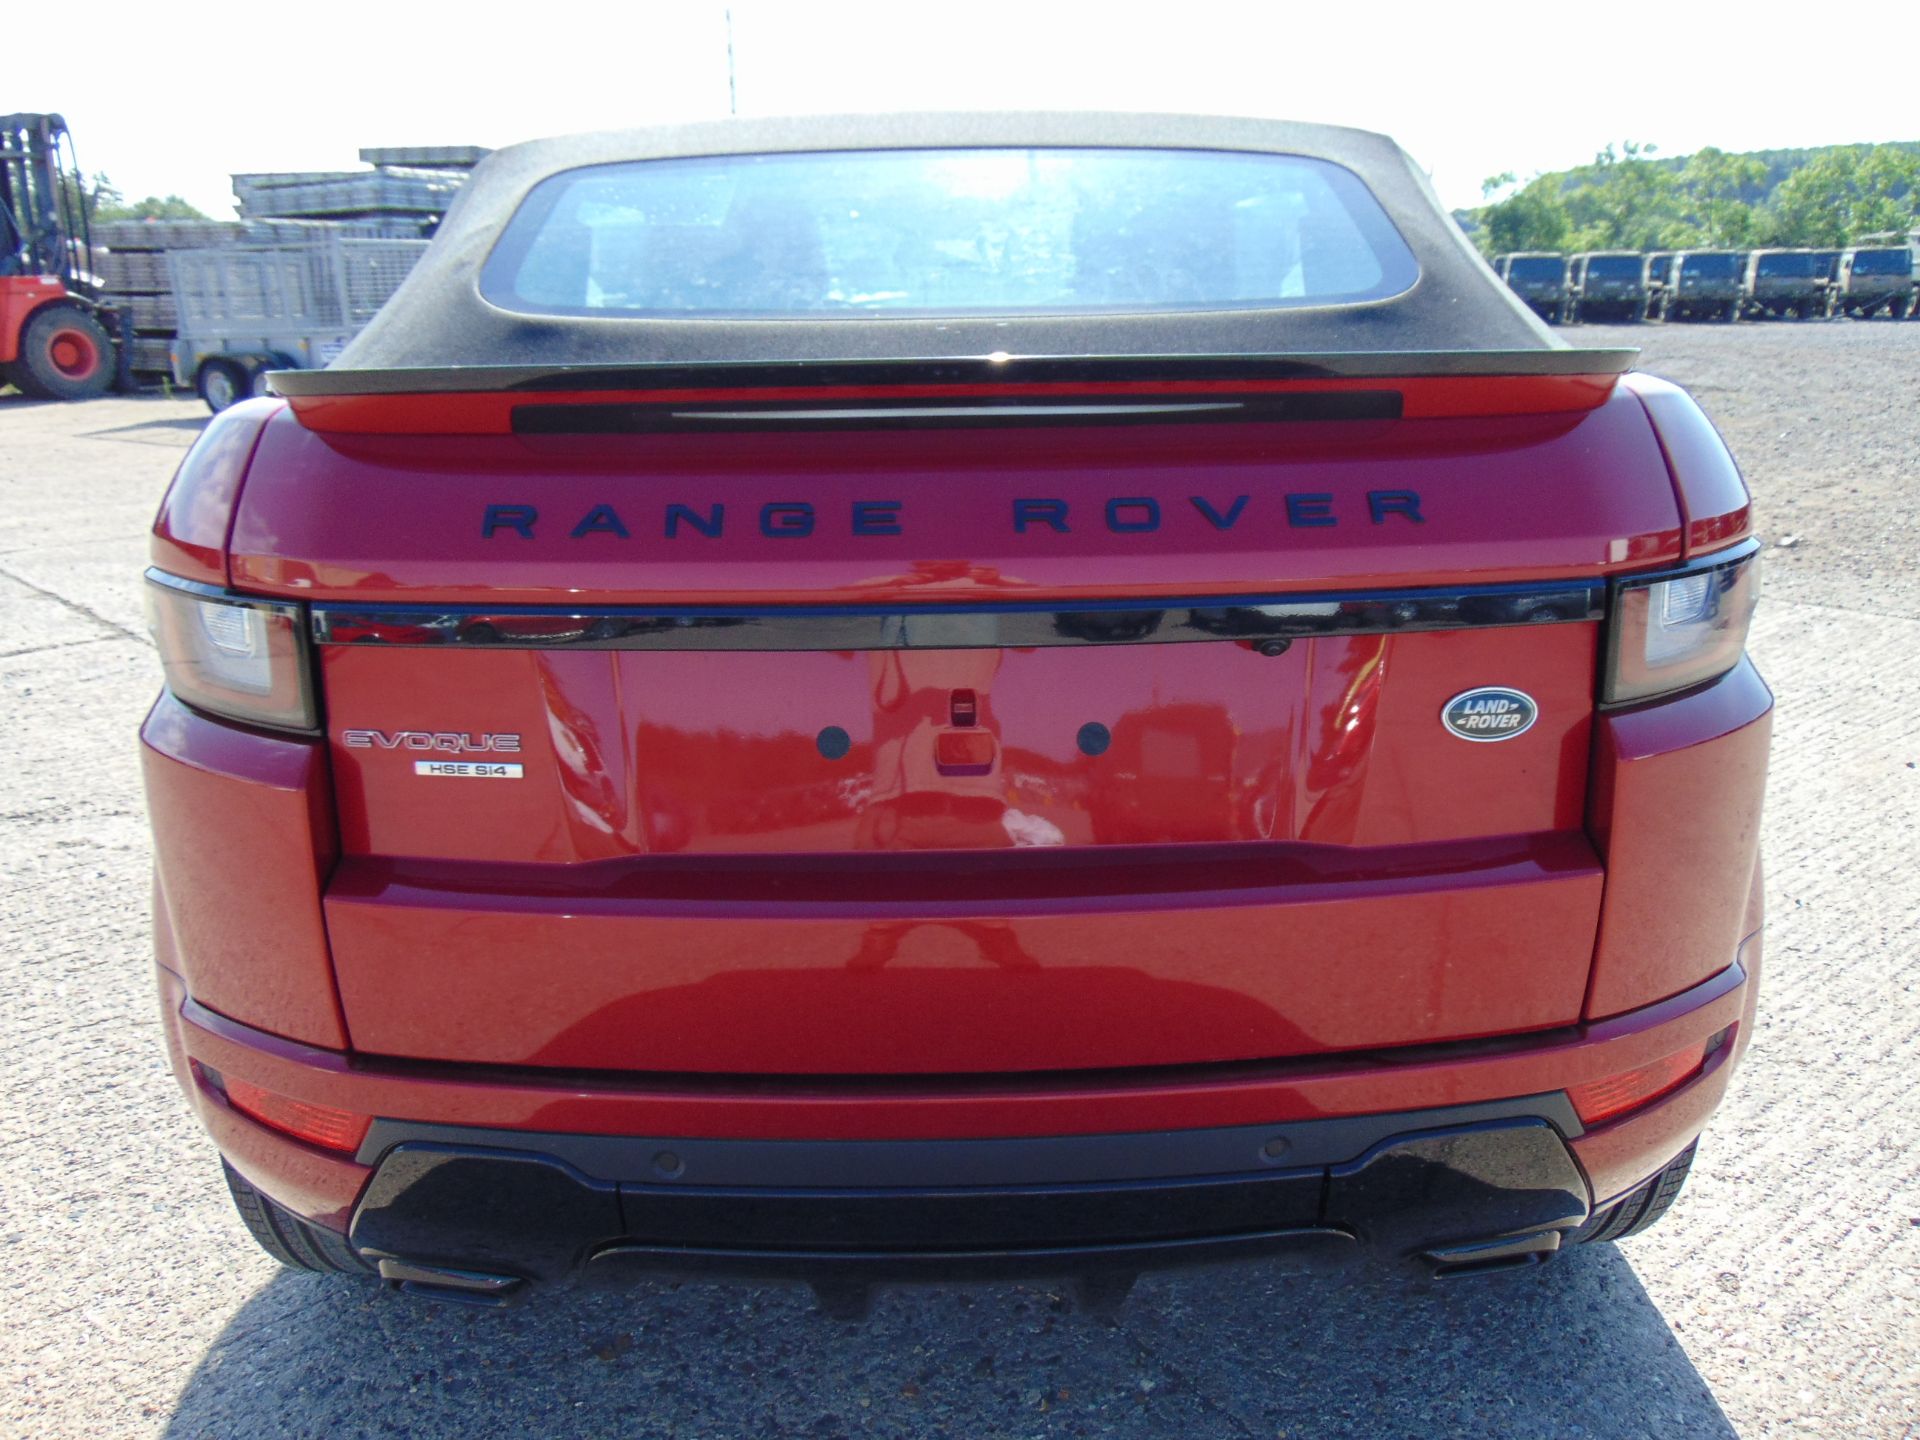 NEW UNUSED Range Rover Evoque 2.0 i4 HSE Dynamic Convertible - Image 14 of 39